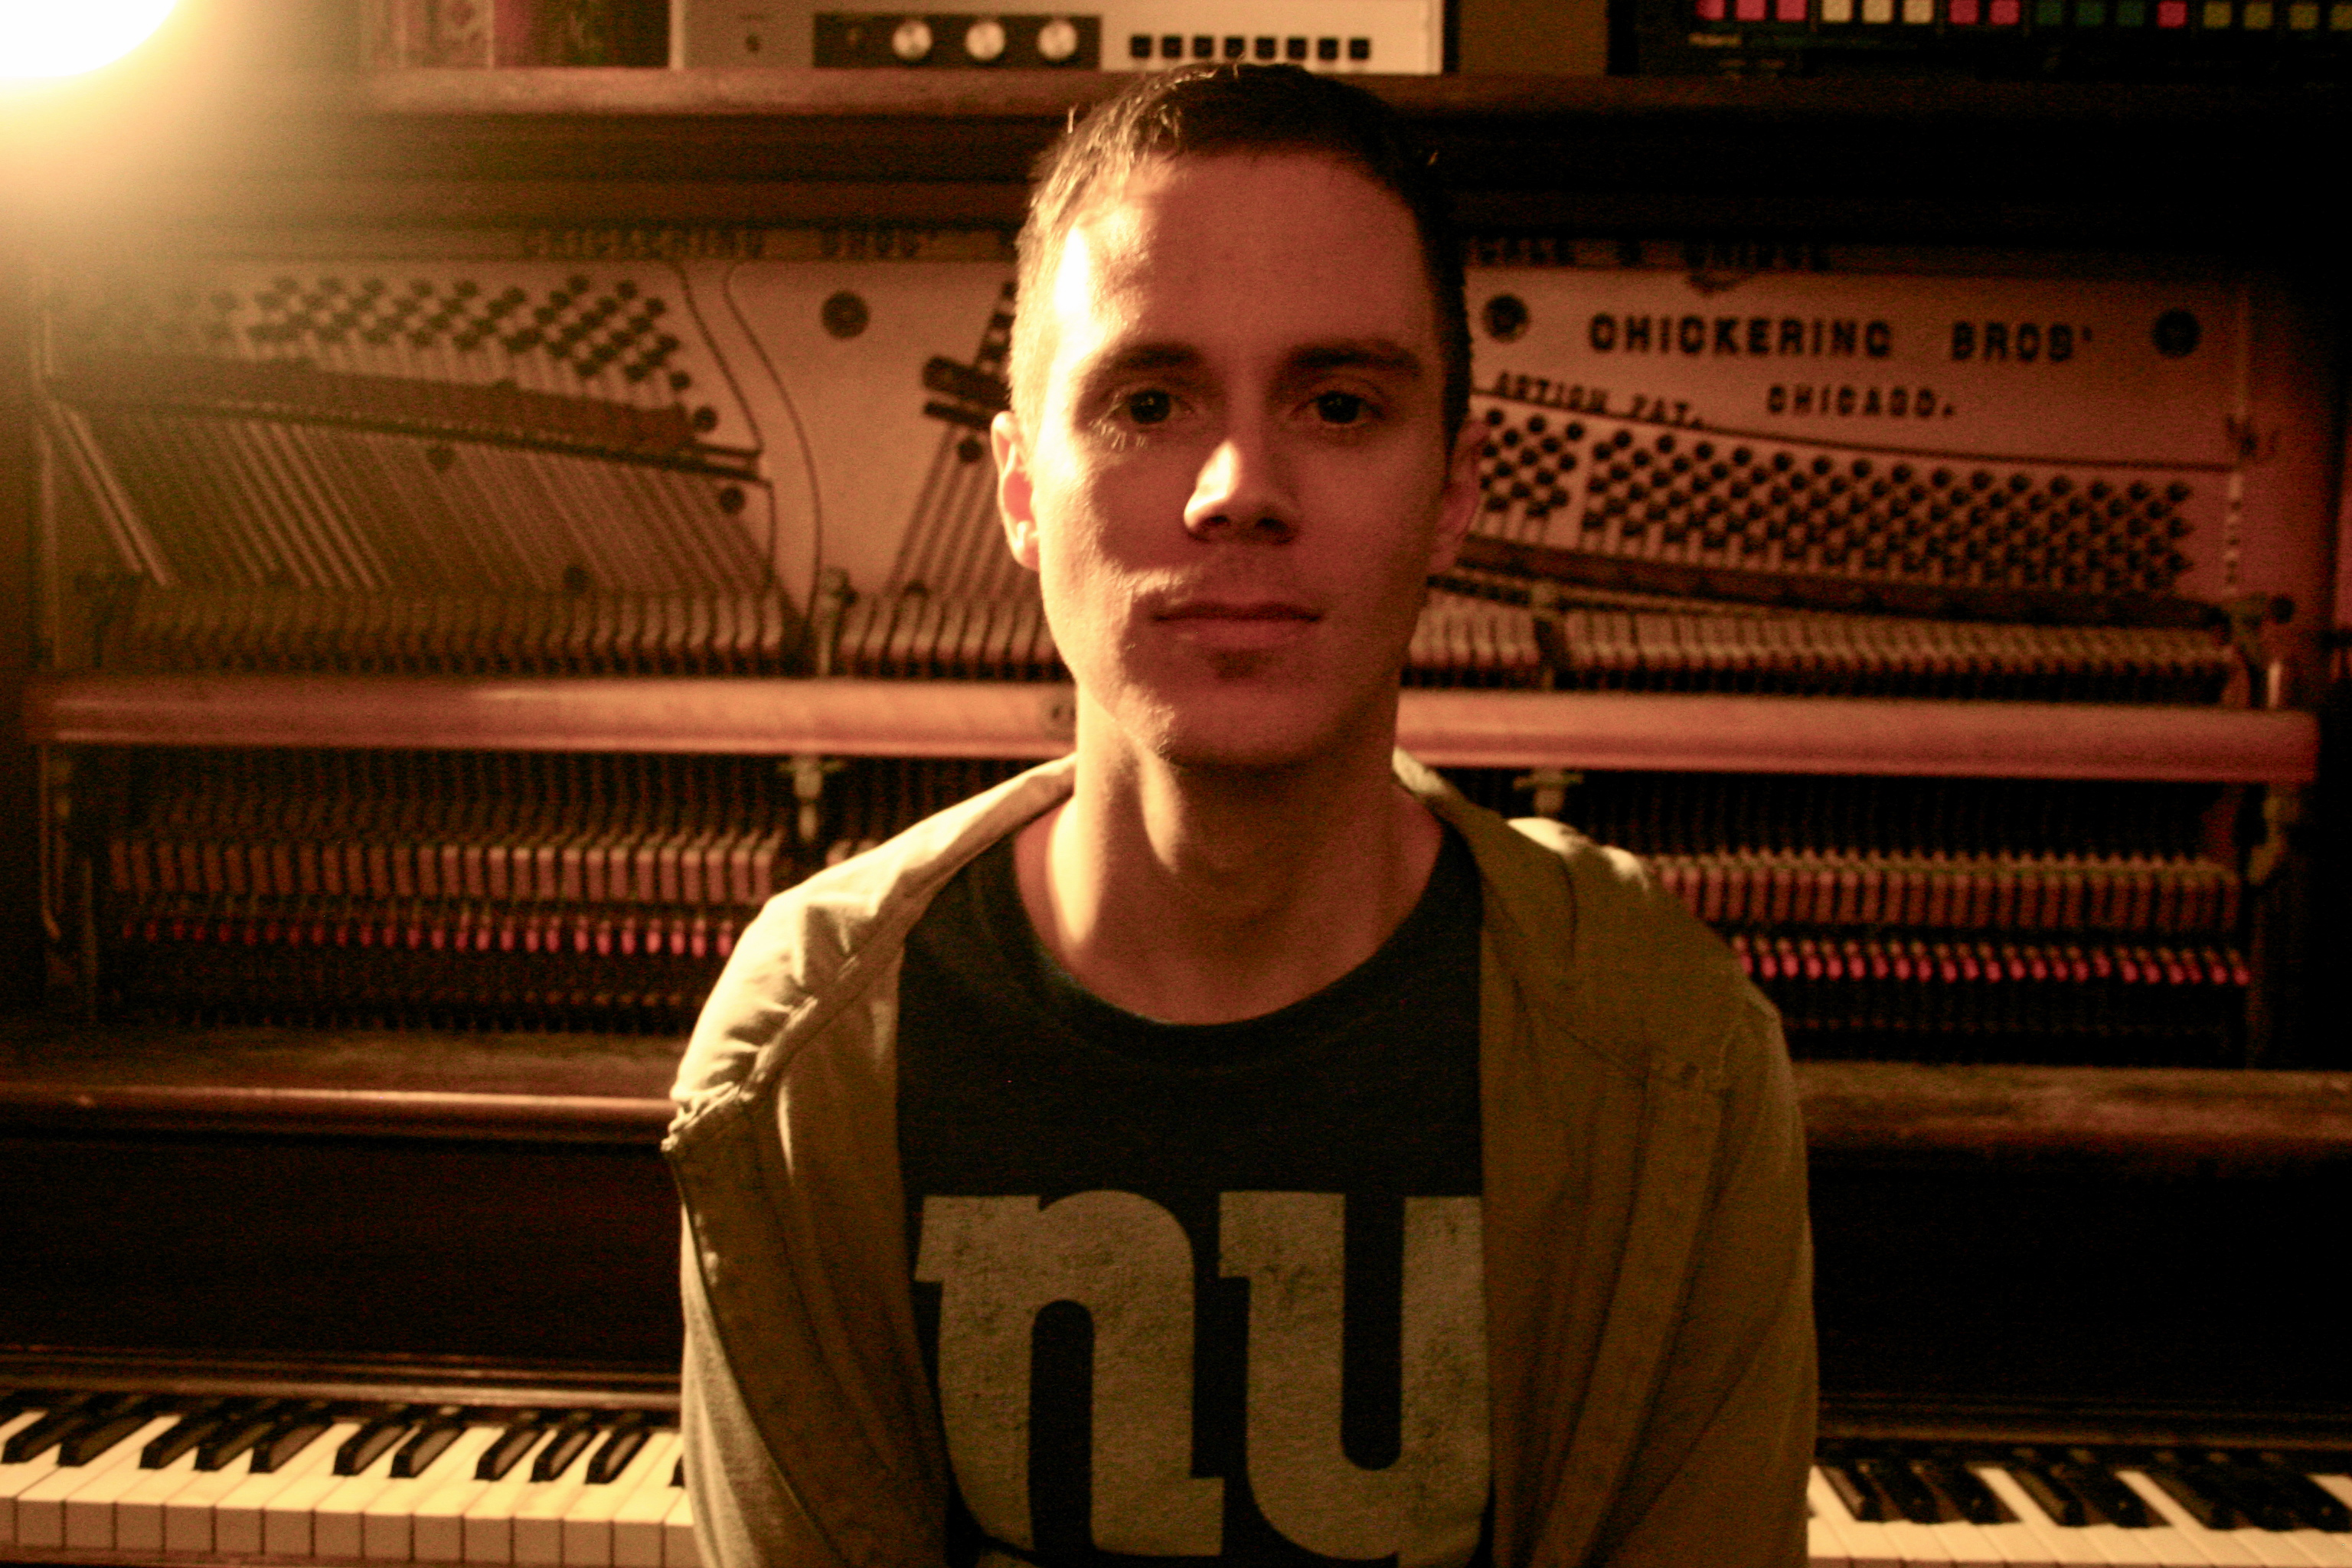 Interview with John Congleton. The producer, known for working with ST. Vincent, The War on Drugs